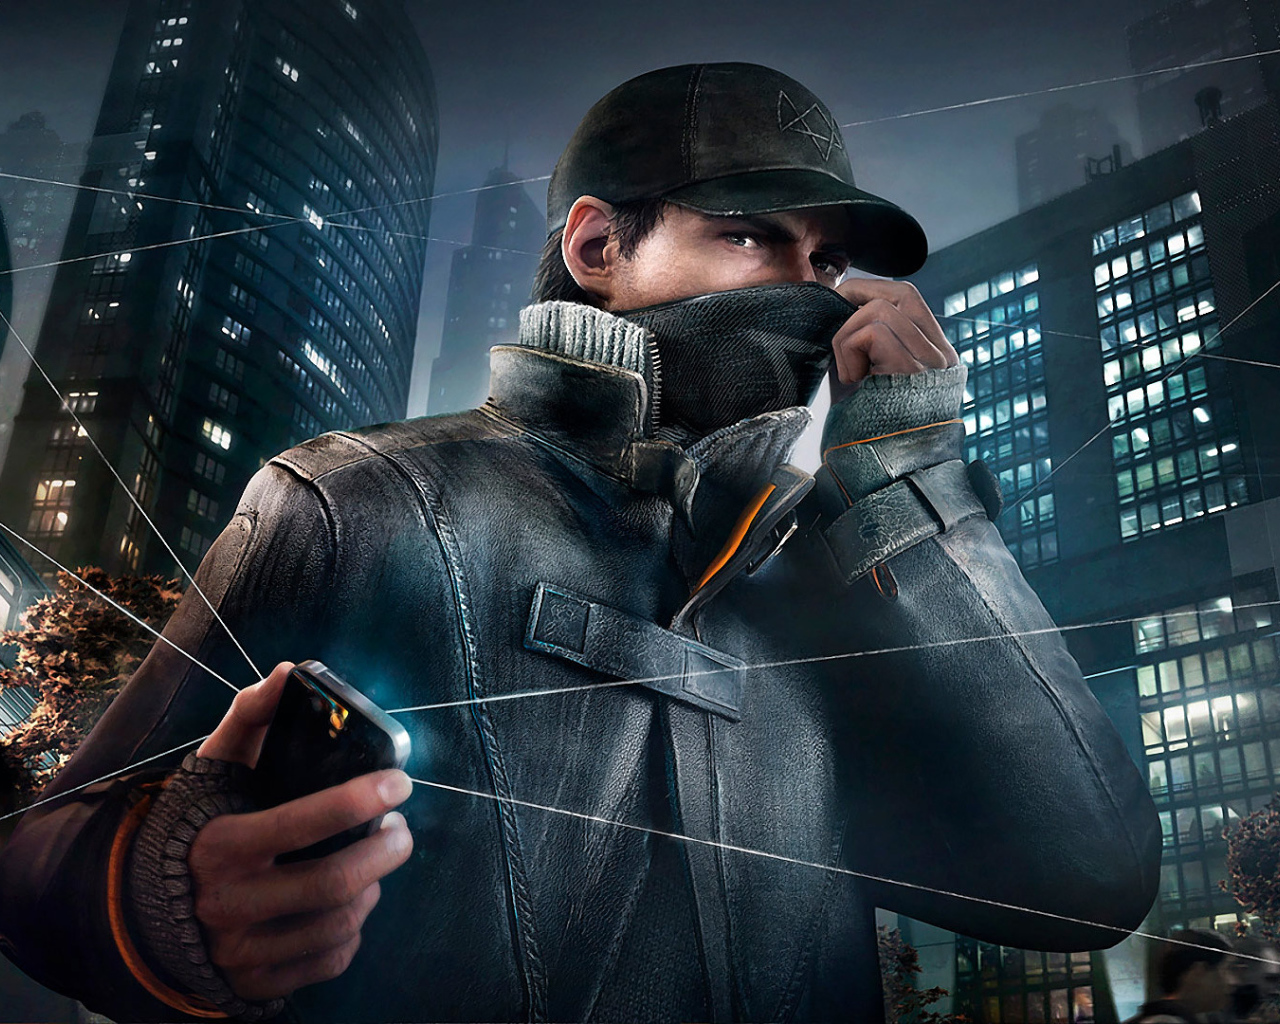 Watch Dogs: hero hiding his face